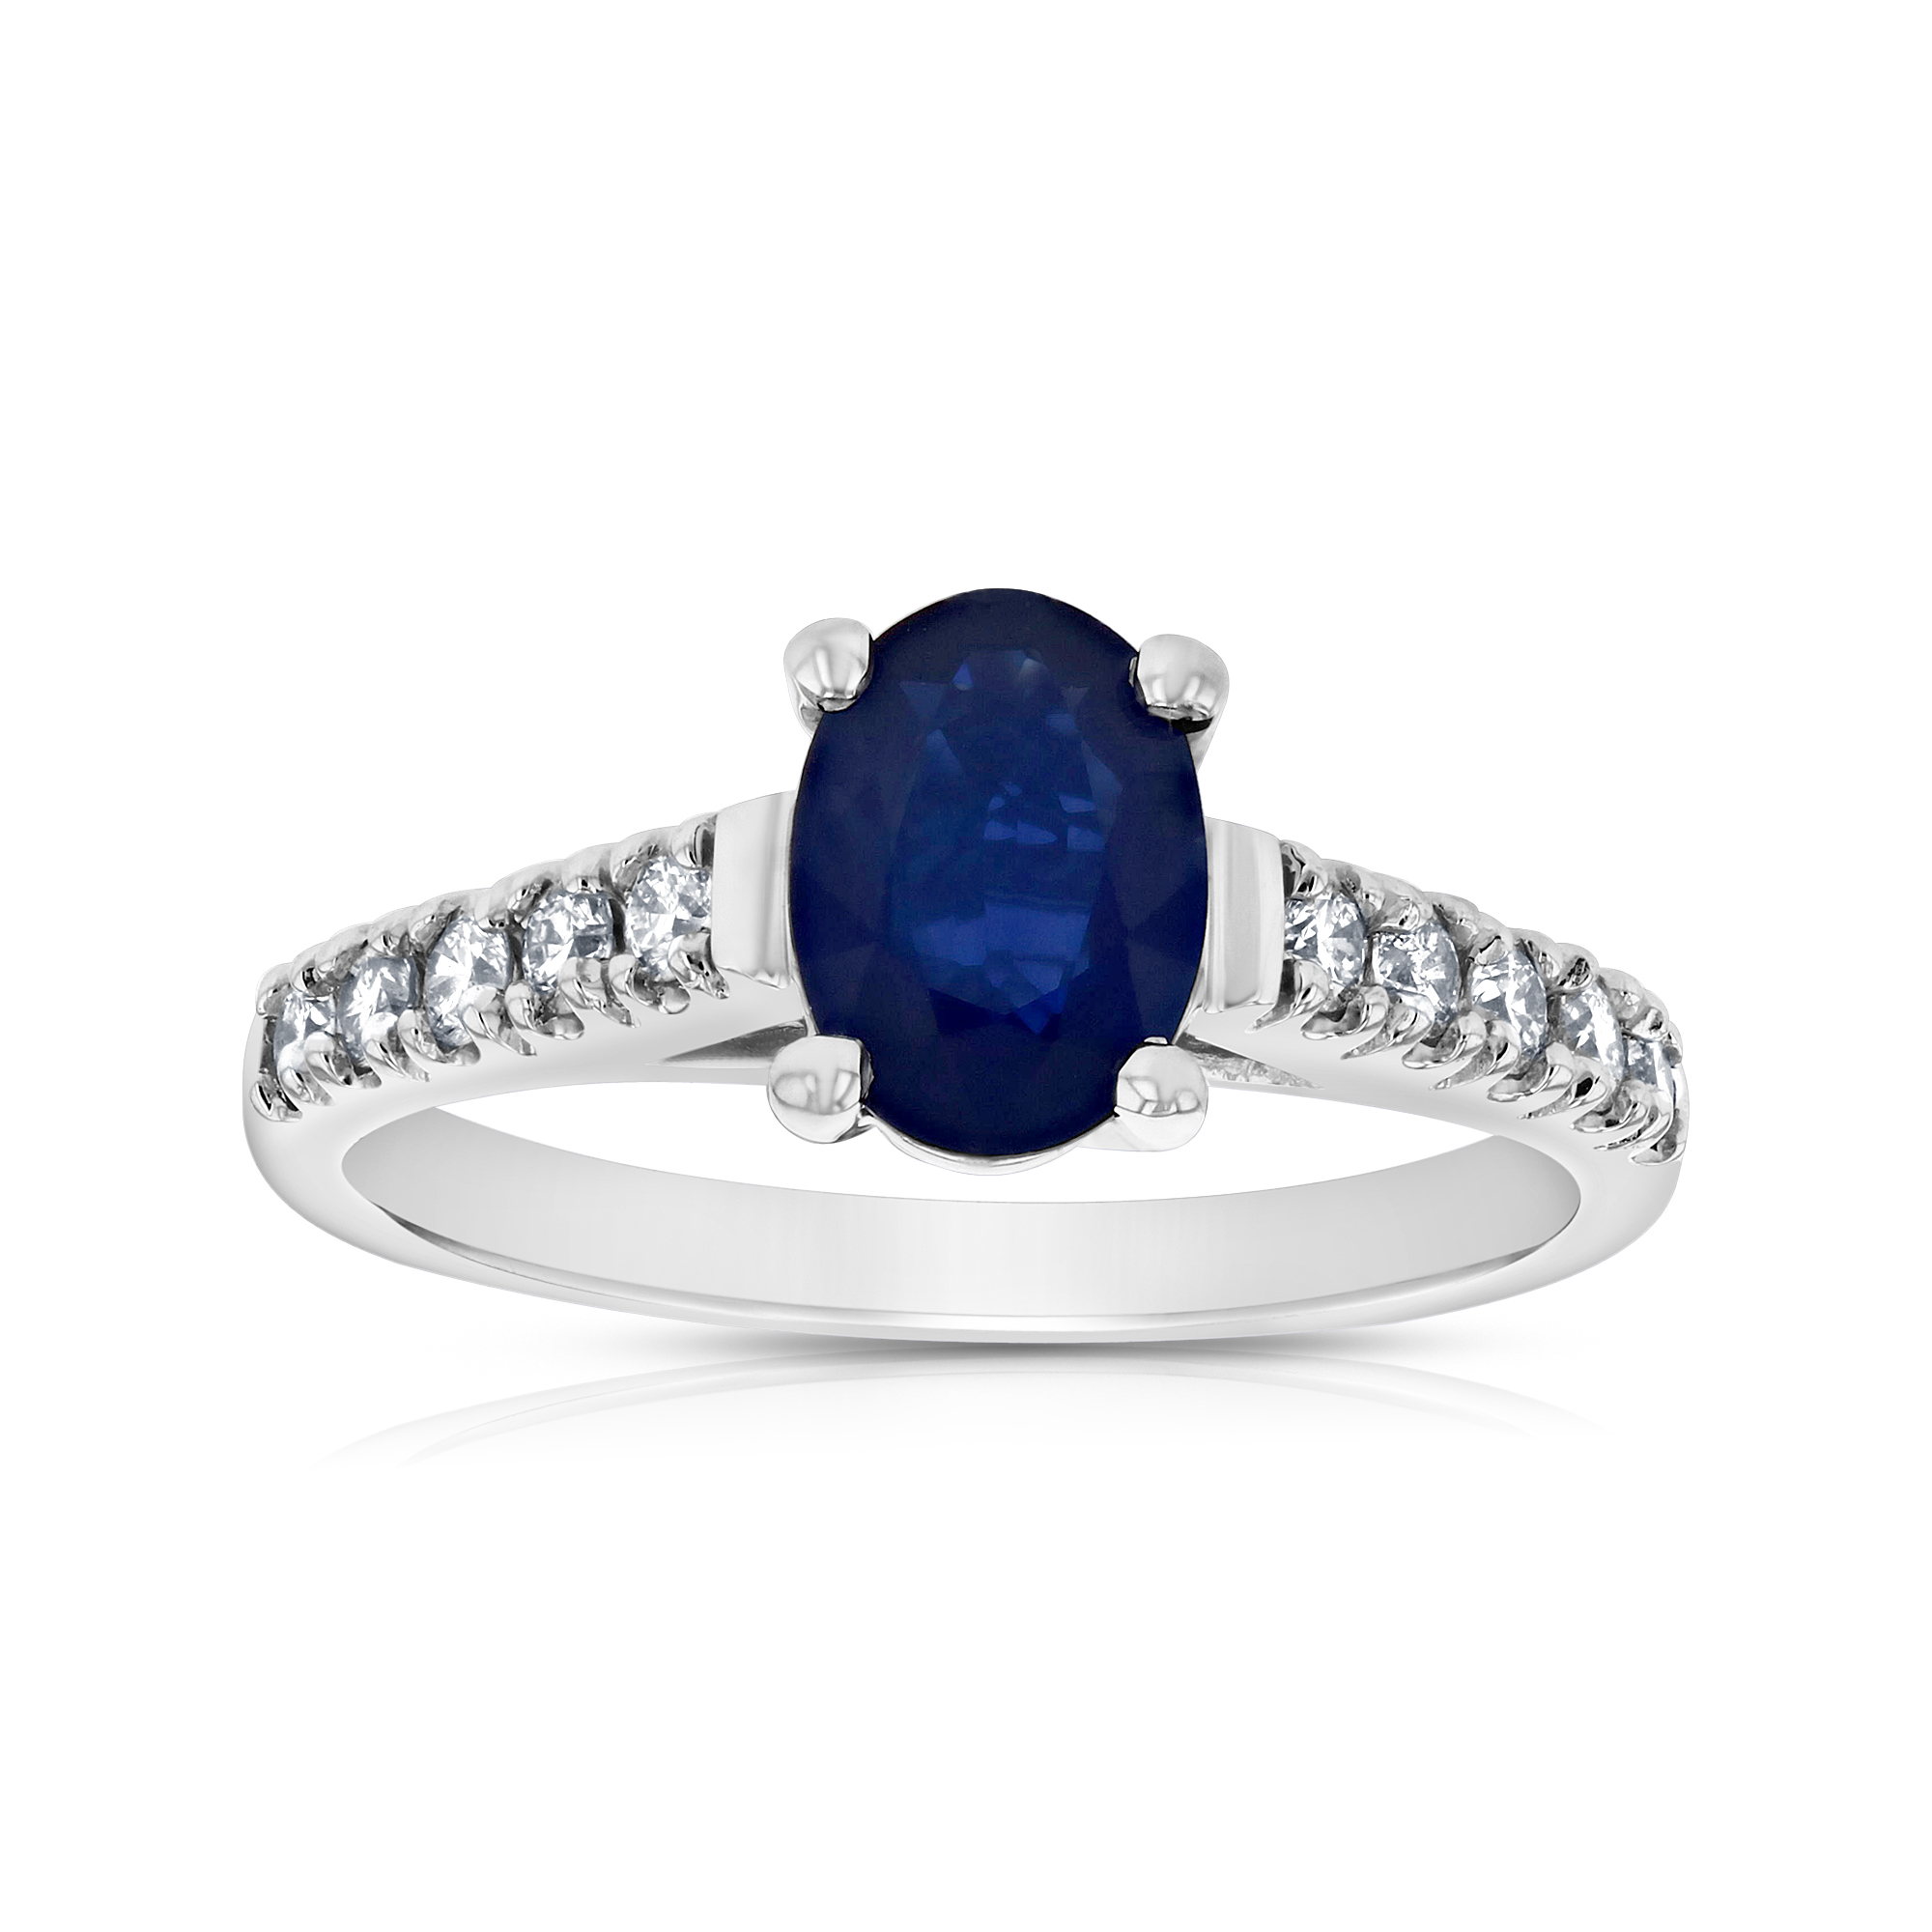 View 1.60ctw Diamond and Sapphire Ring in 14k Gold